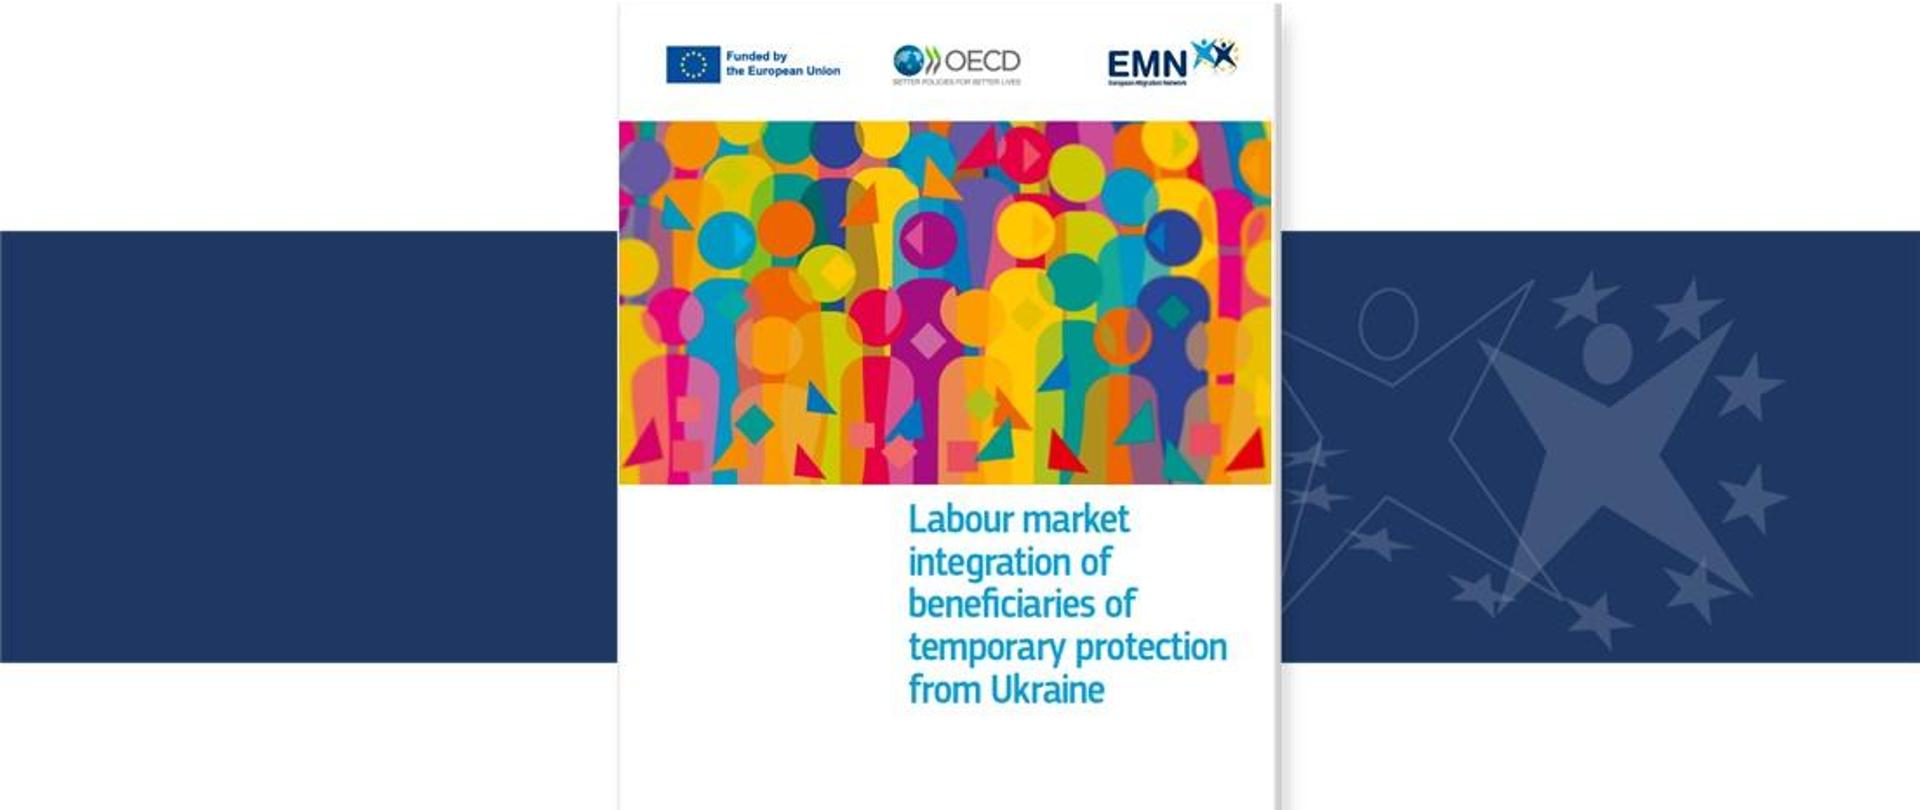 EMN Inform on Labour market integration of beneficiaries of temporary protection from Ukraine